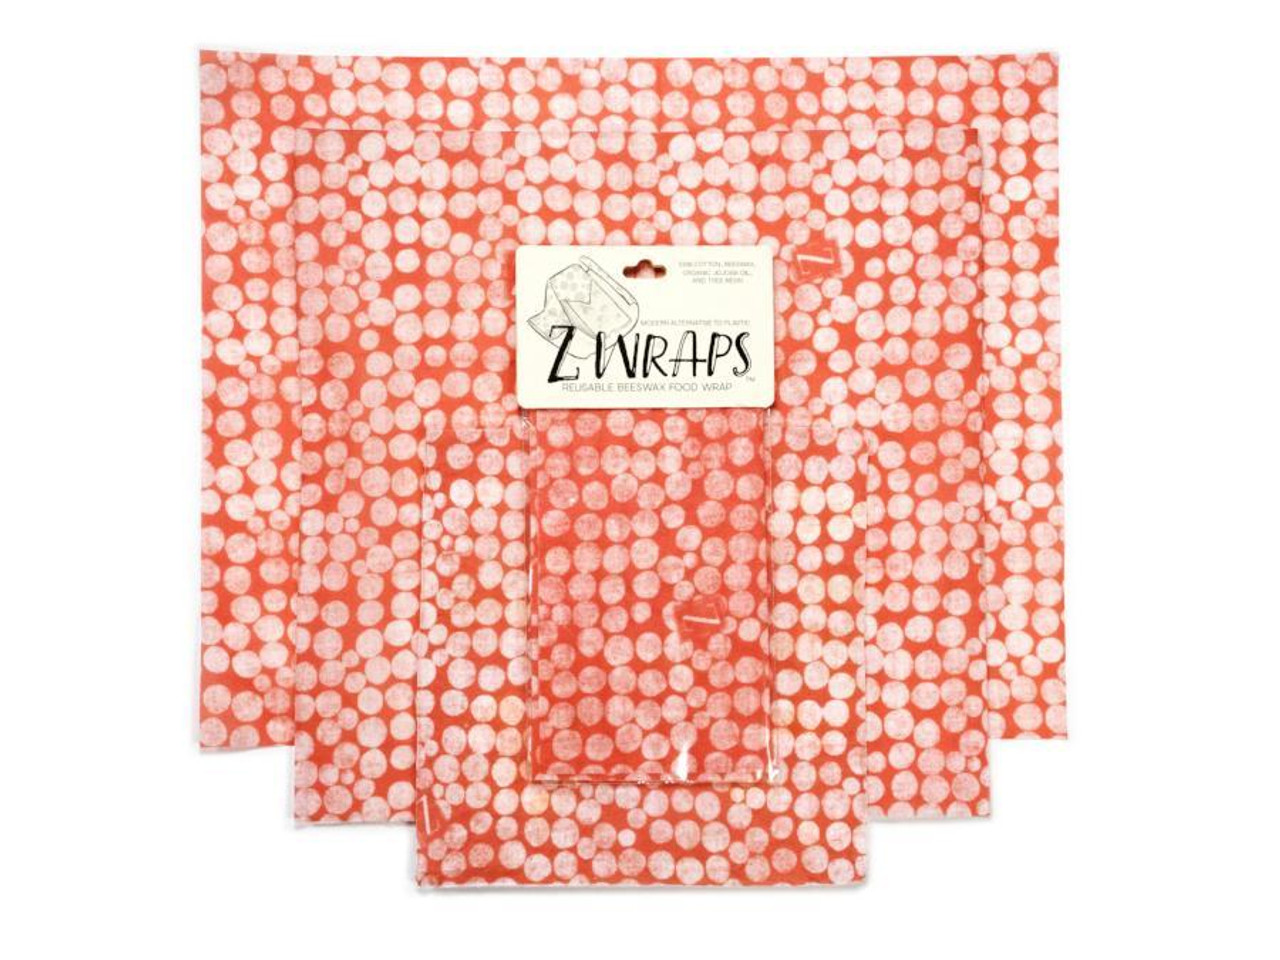 ZWraps Reusable Beeswax Food Wrap - Multi-Pack: Small, Medium, Large - Connect the Dots (ZW MULTIDOT)